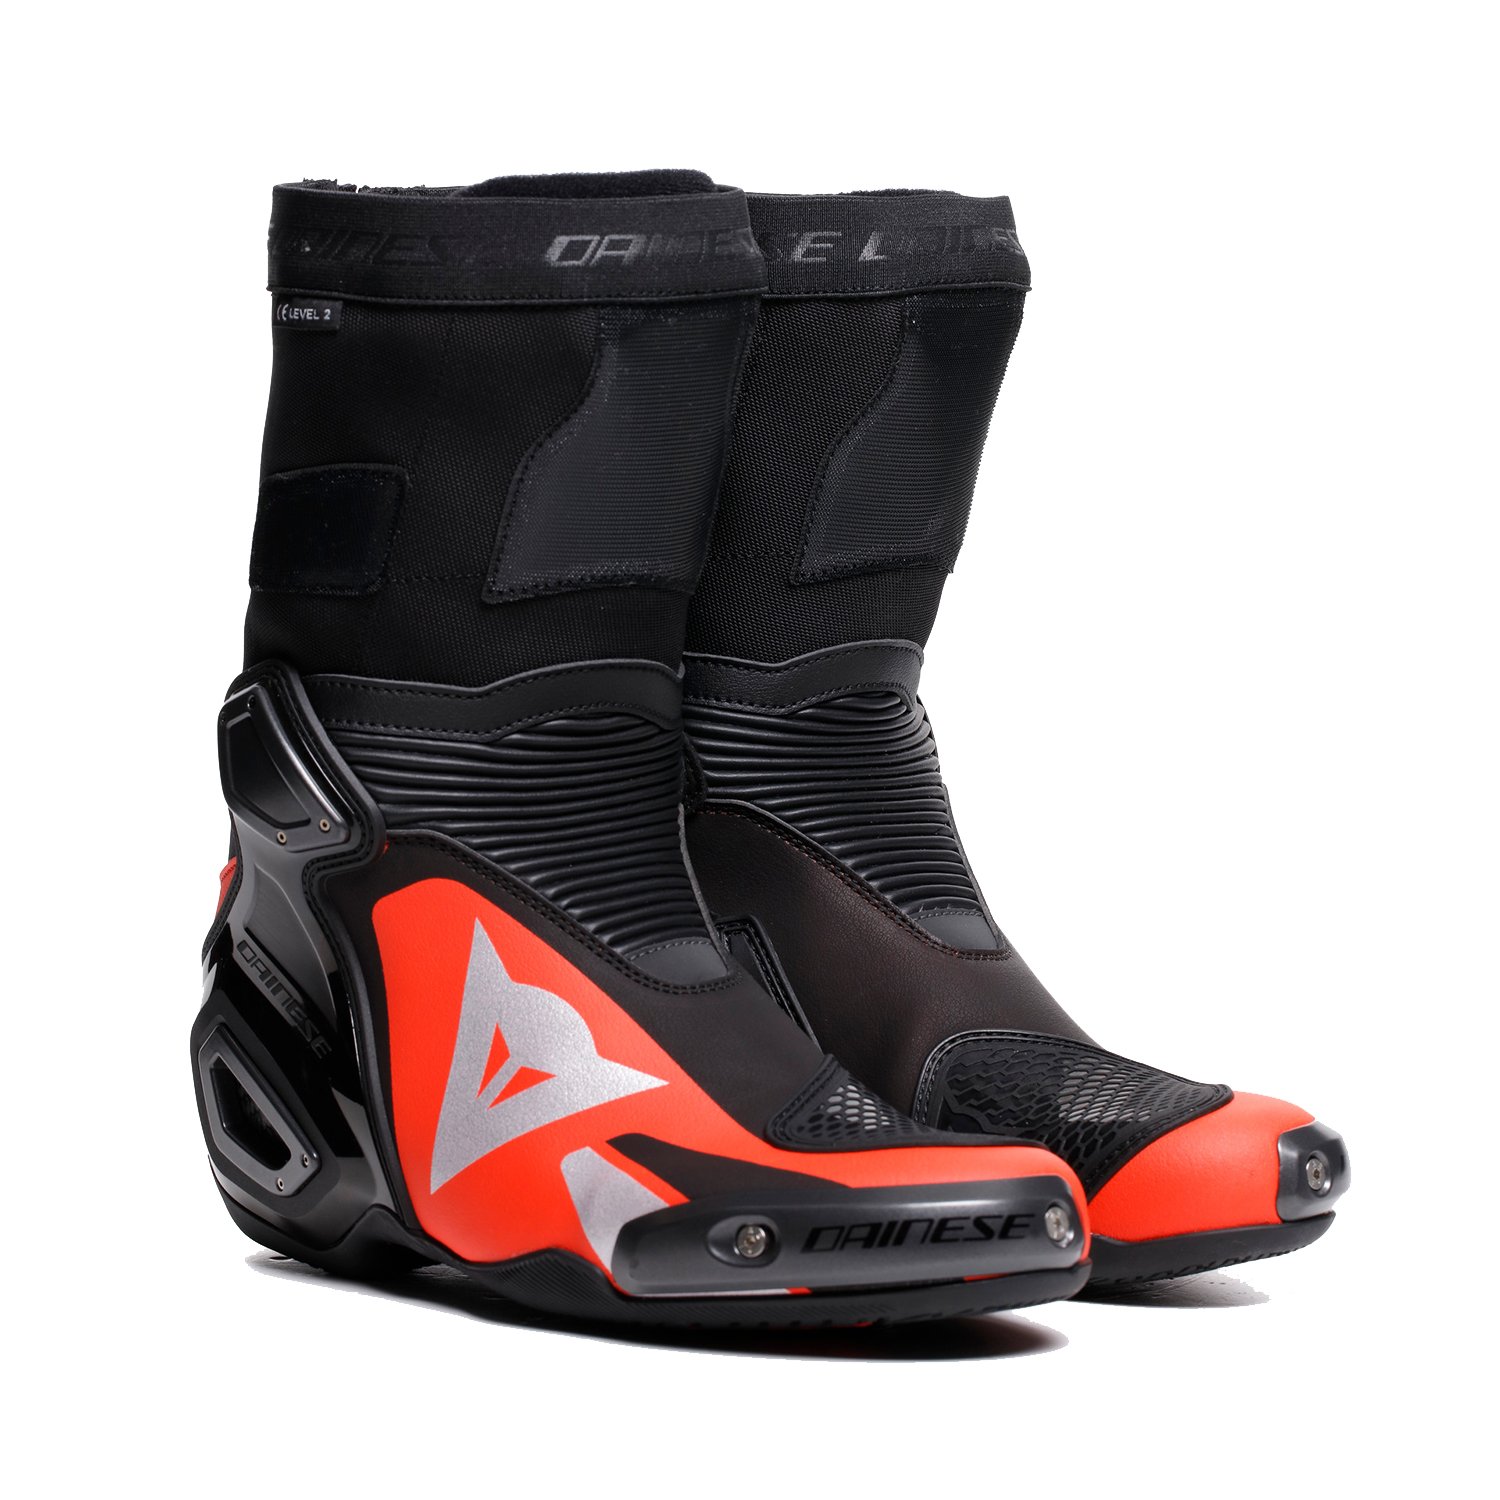 Image of Dainese Axial 2 Boots Black Red Fluo Taille 42